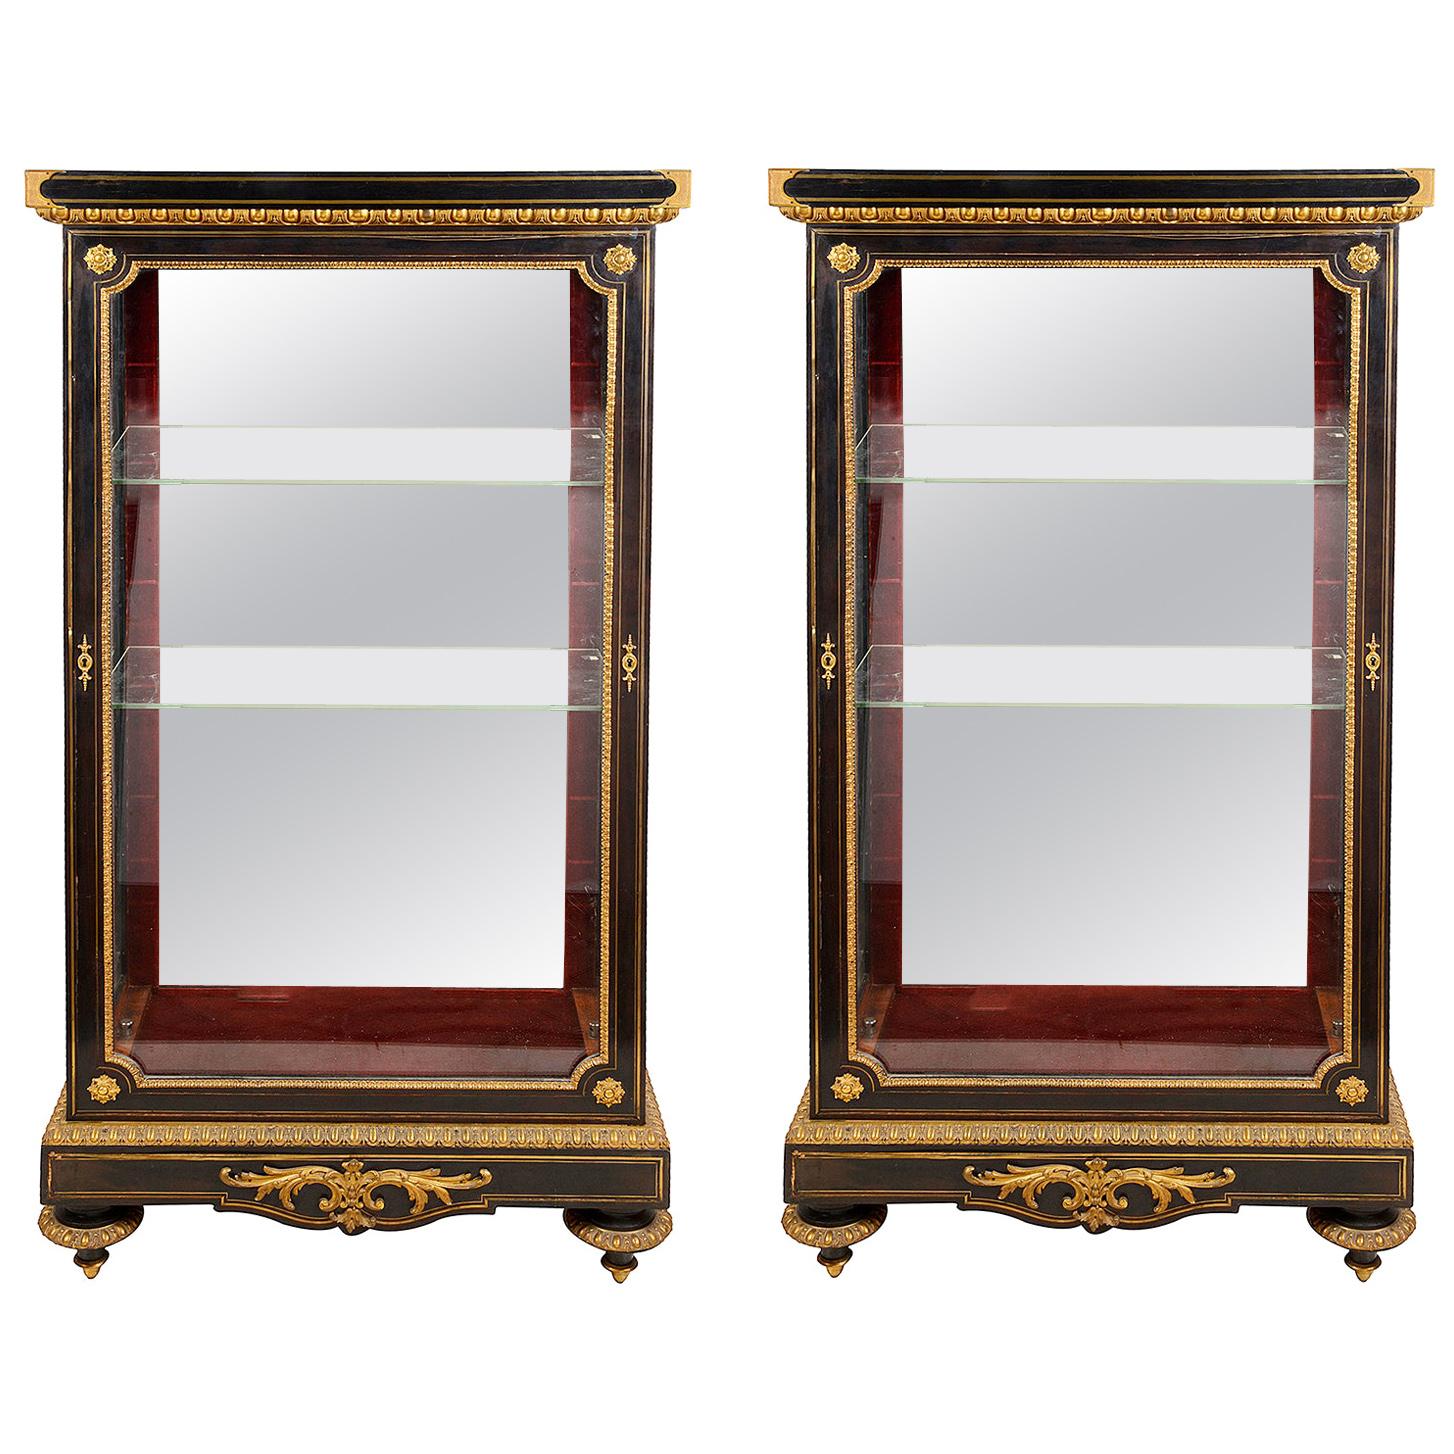 Pair of French Ebony and Ormolu Vitrines, circa 1870 For Sale